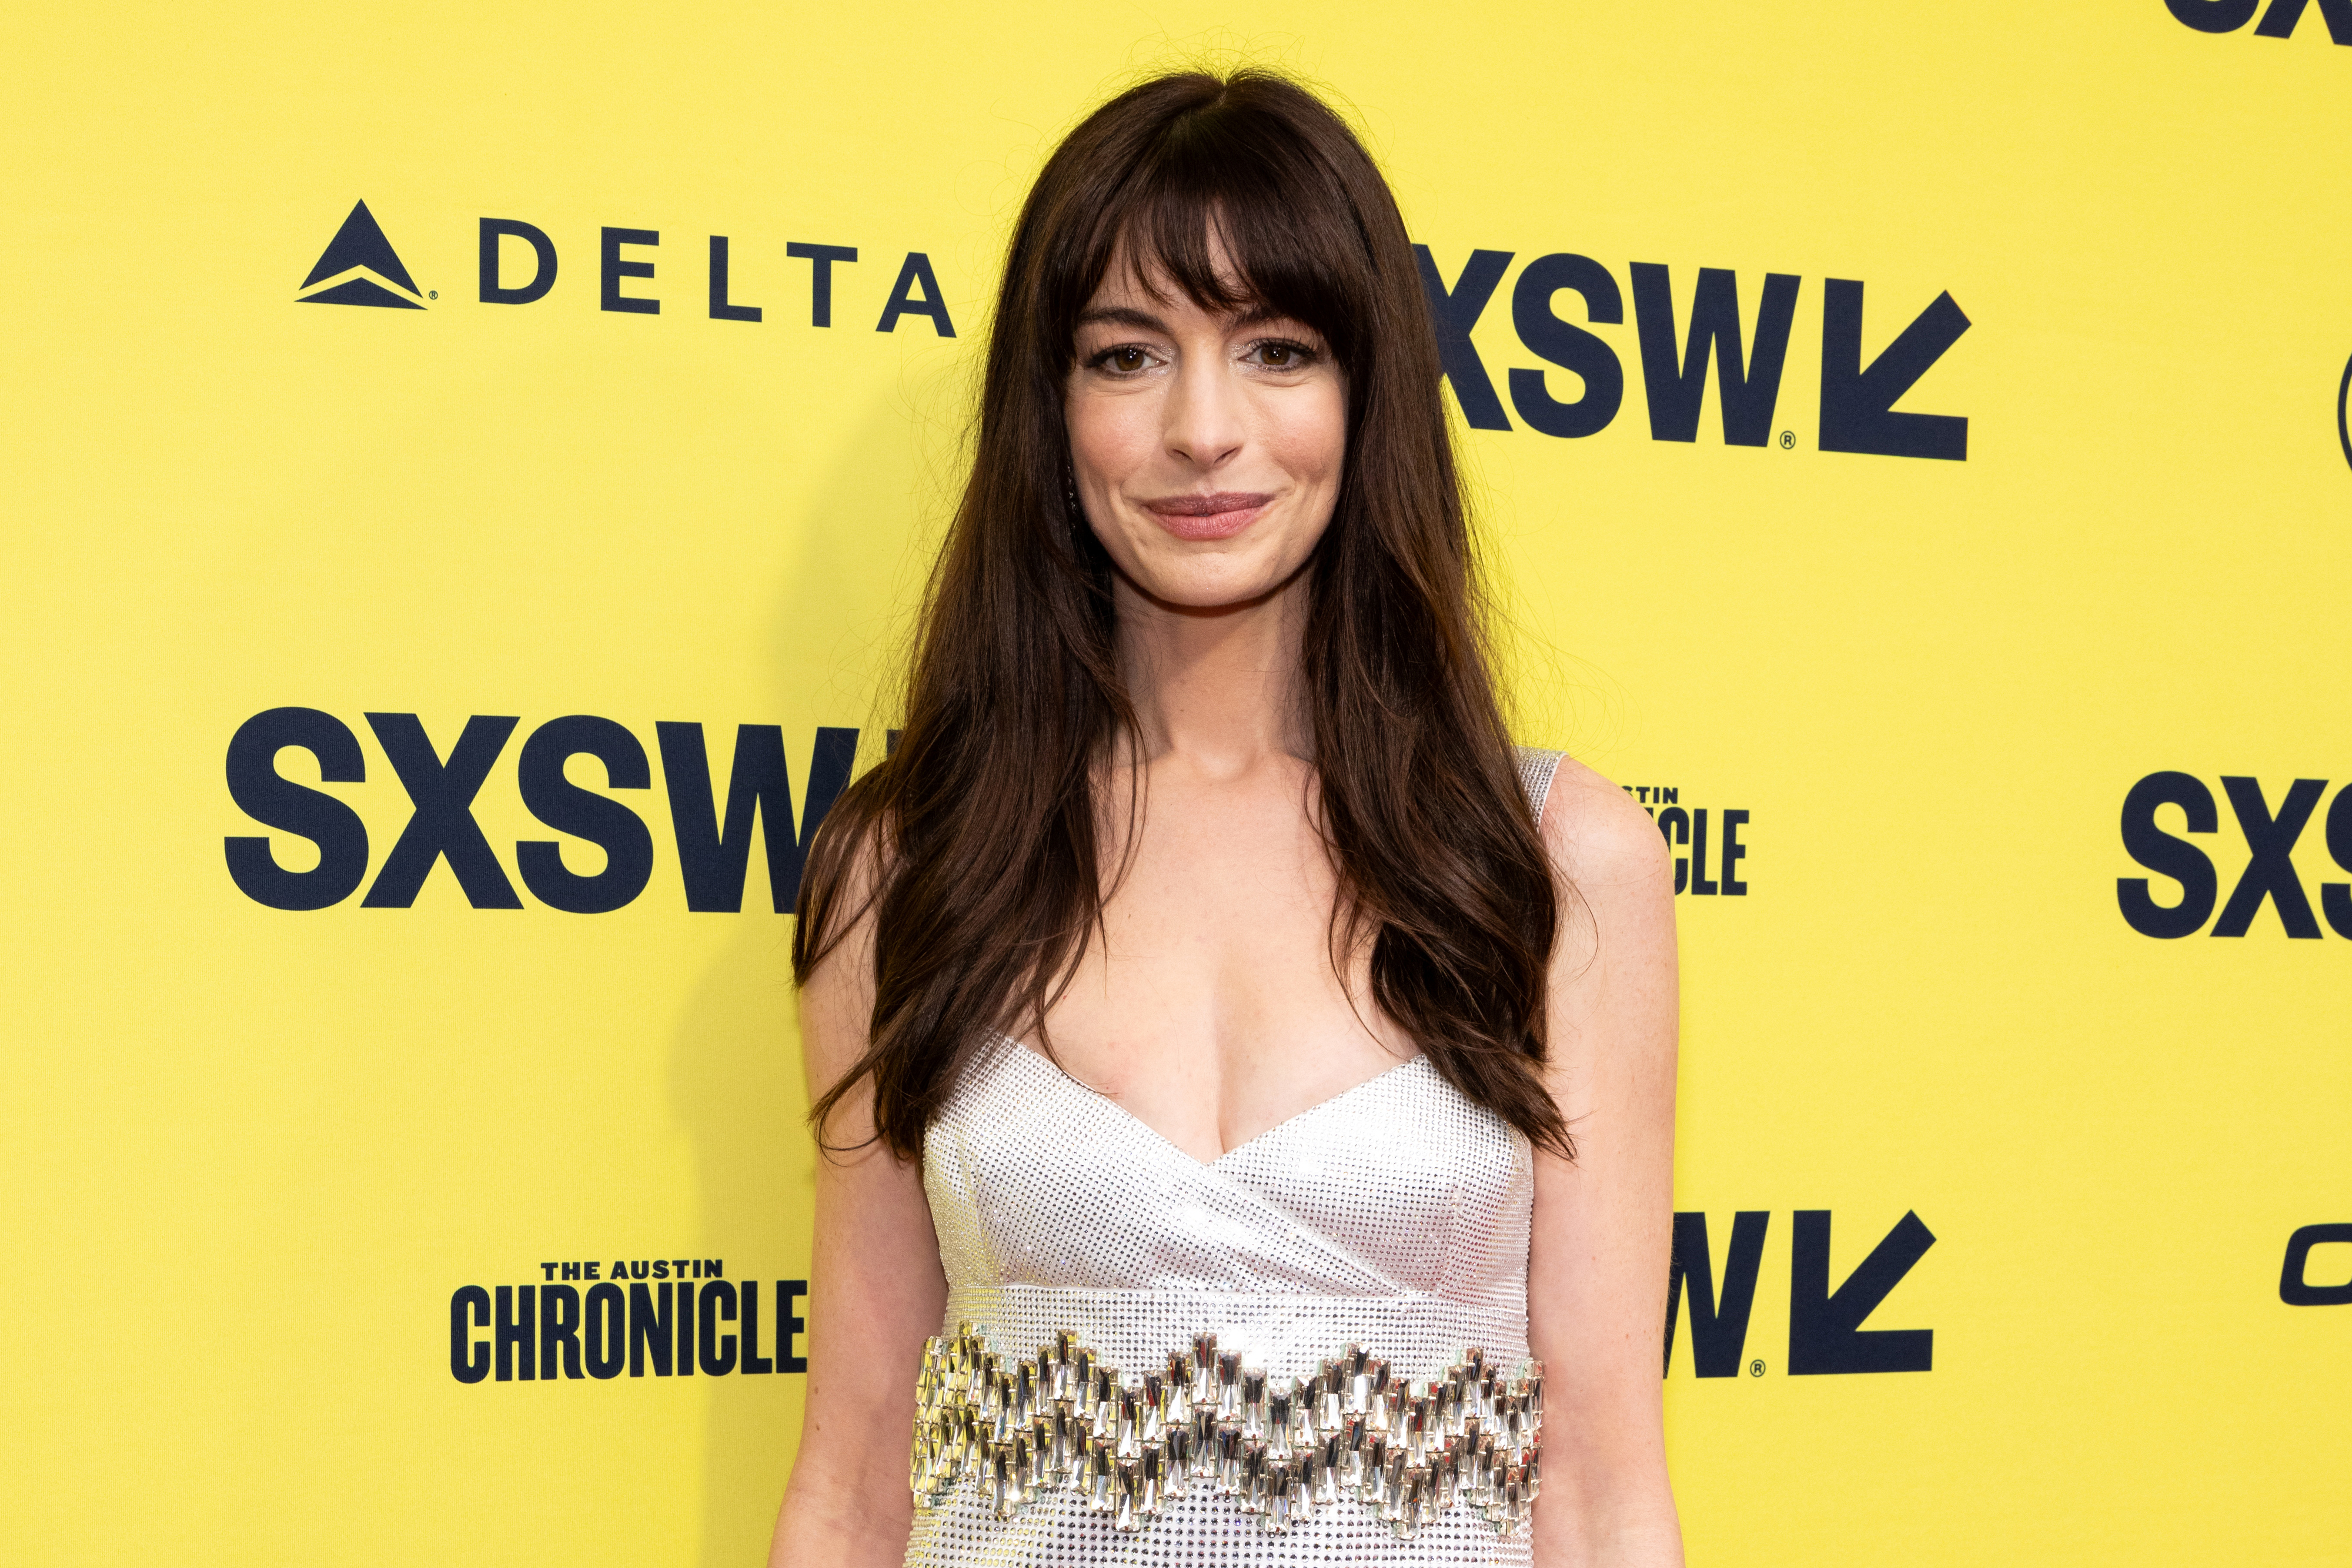 Anne Hathaway in a sleeveless v-neck dress at SXSW event